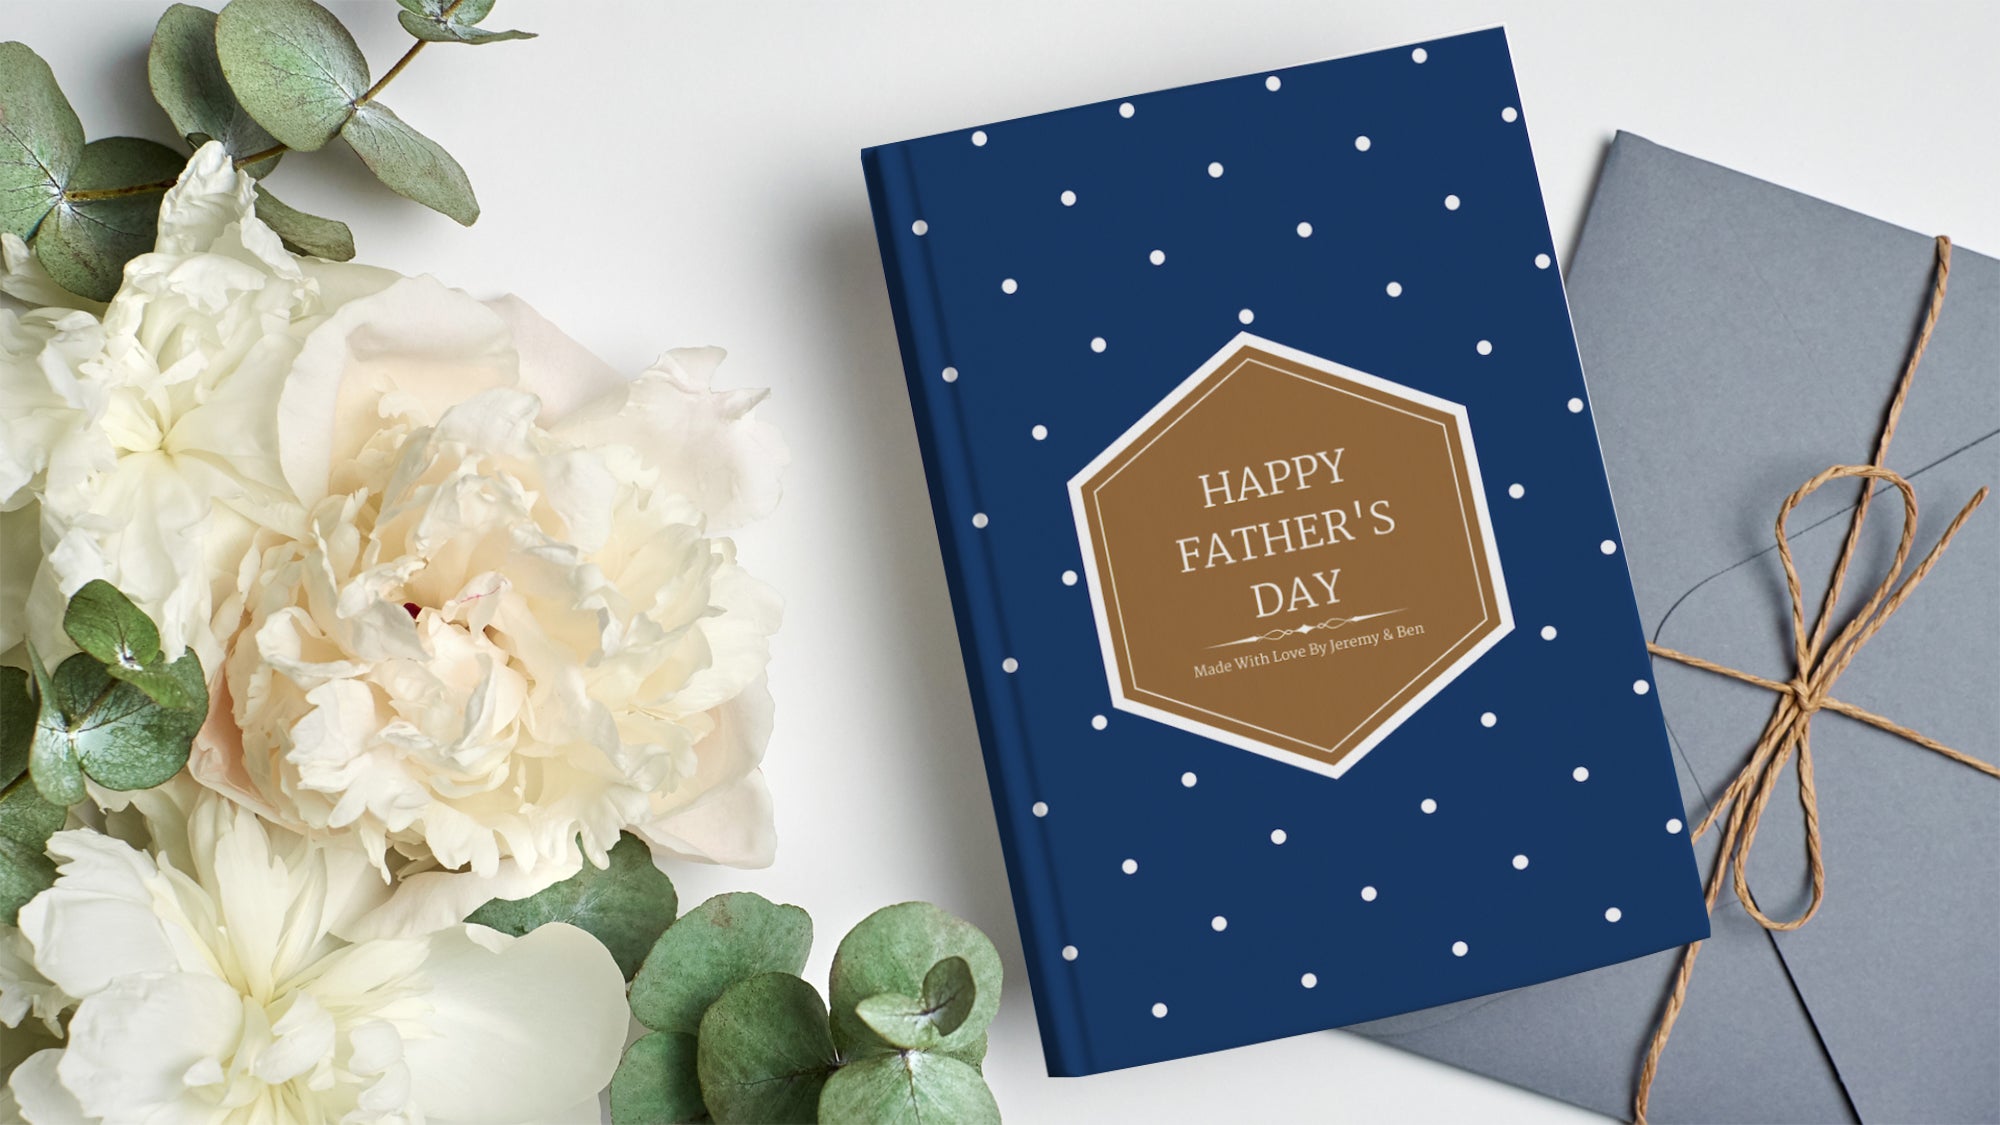 Happy Father's Day Gifts For Dad